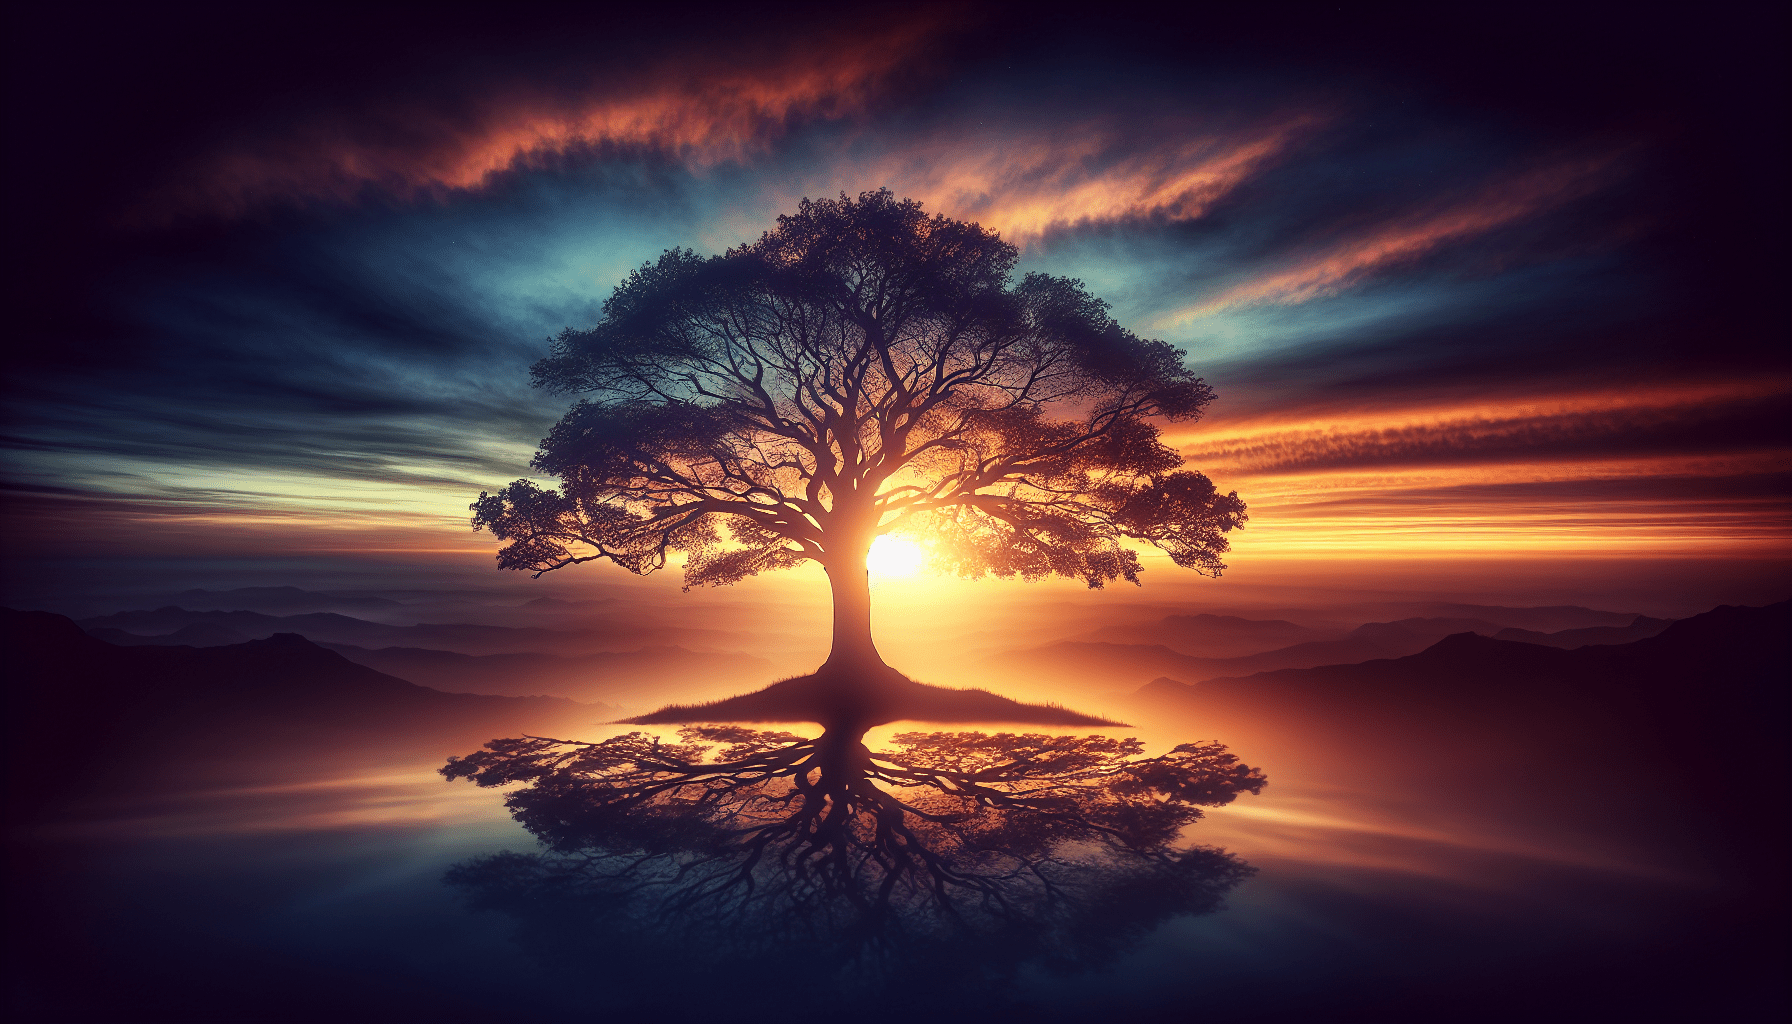 A majestic tree silhouetted against a vibrant sunset, with the sun positioned directly behind the tree, casting a reflection over a tranquil body of water, set against a backdrop of distant mountains and dramatic clouds.